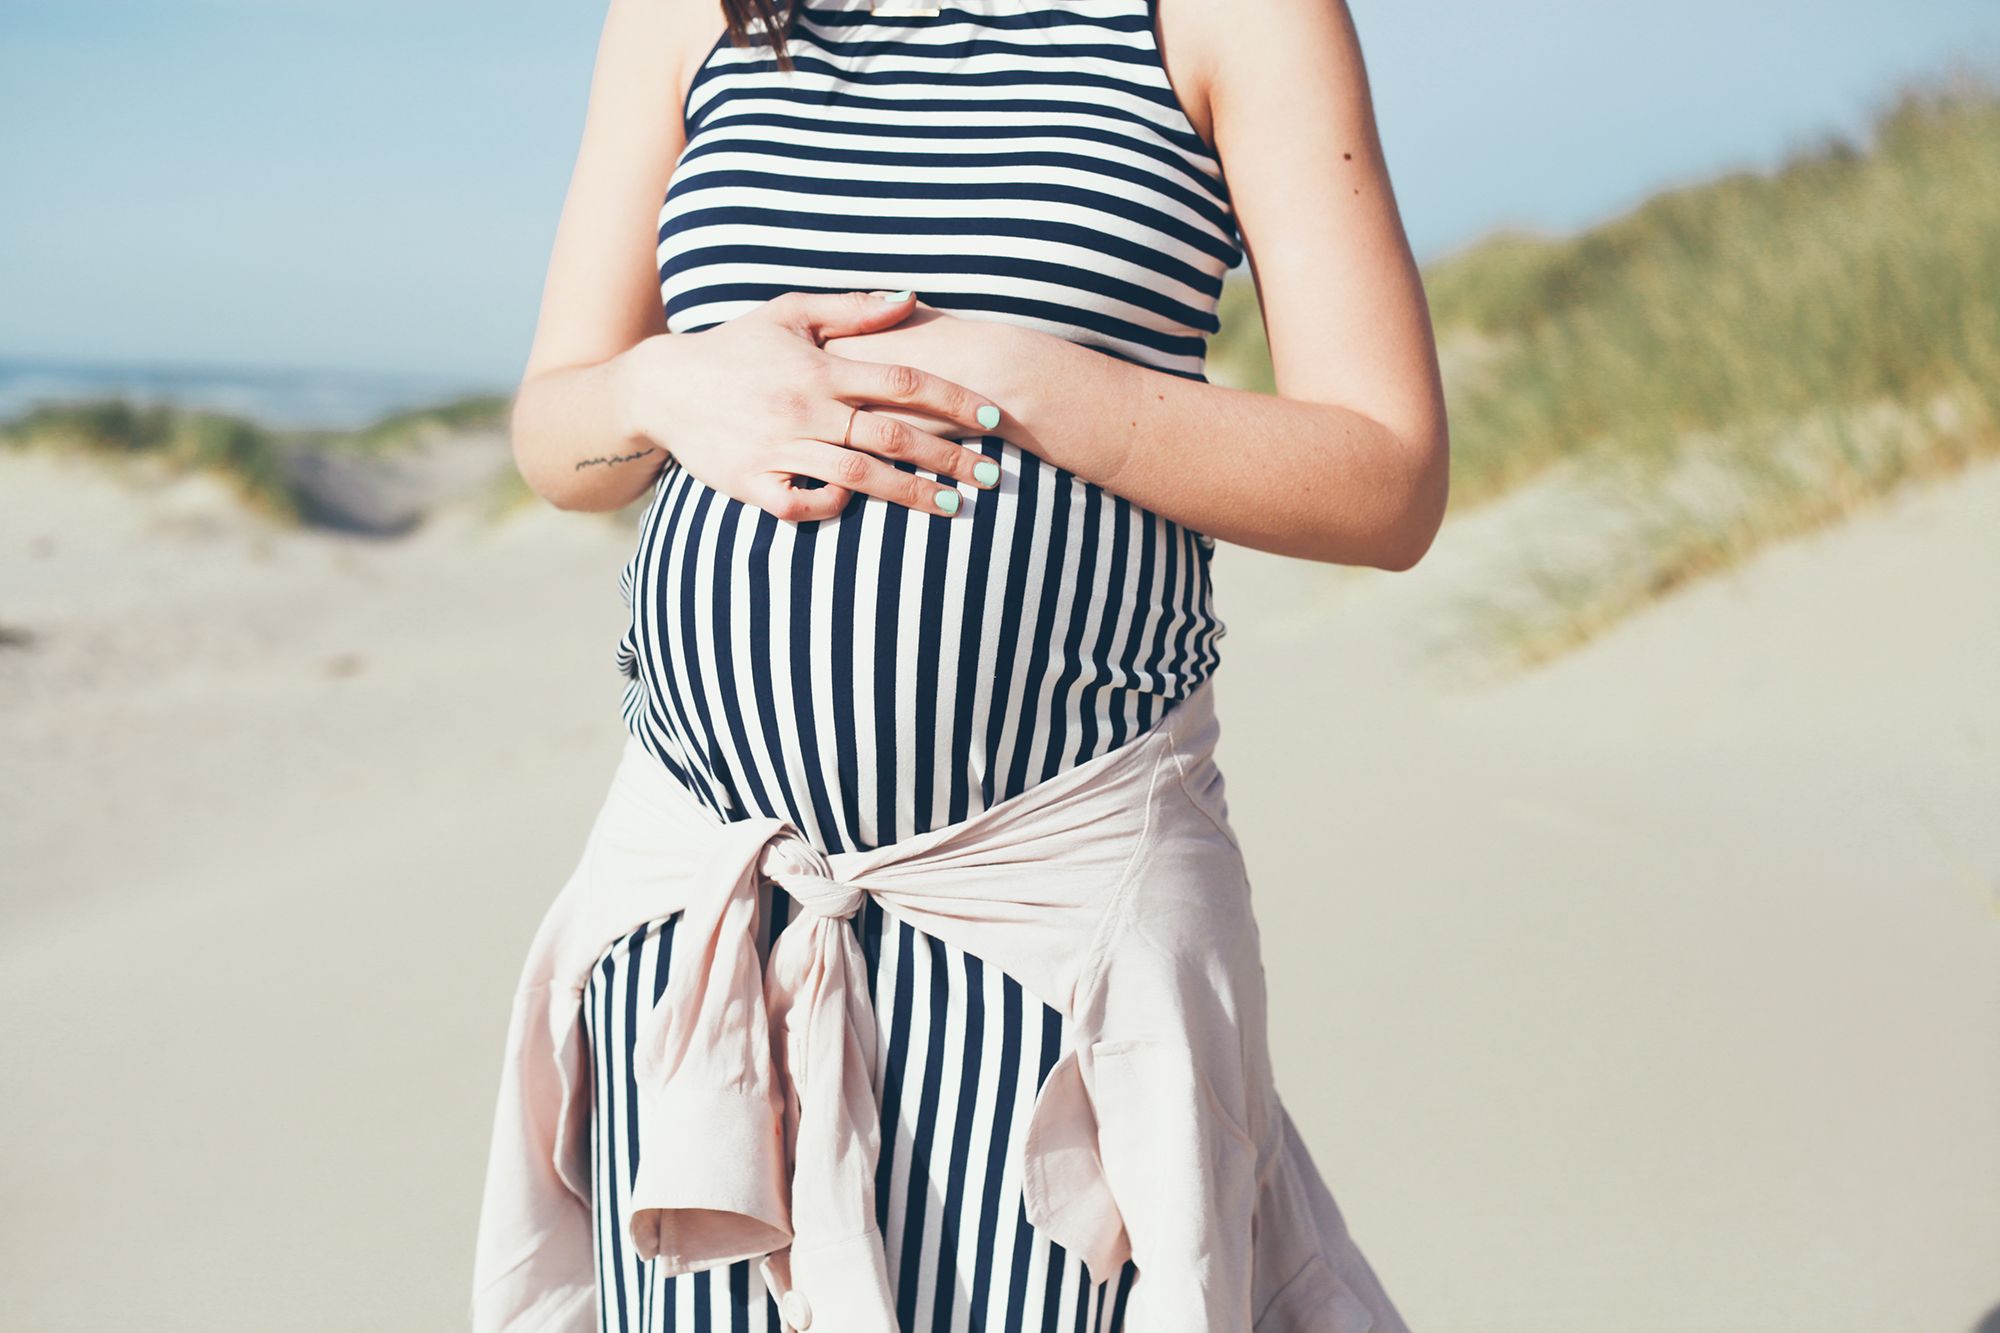 The 15 Pregnancy Essentials You Didn't Know You Needed in 2022